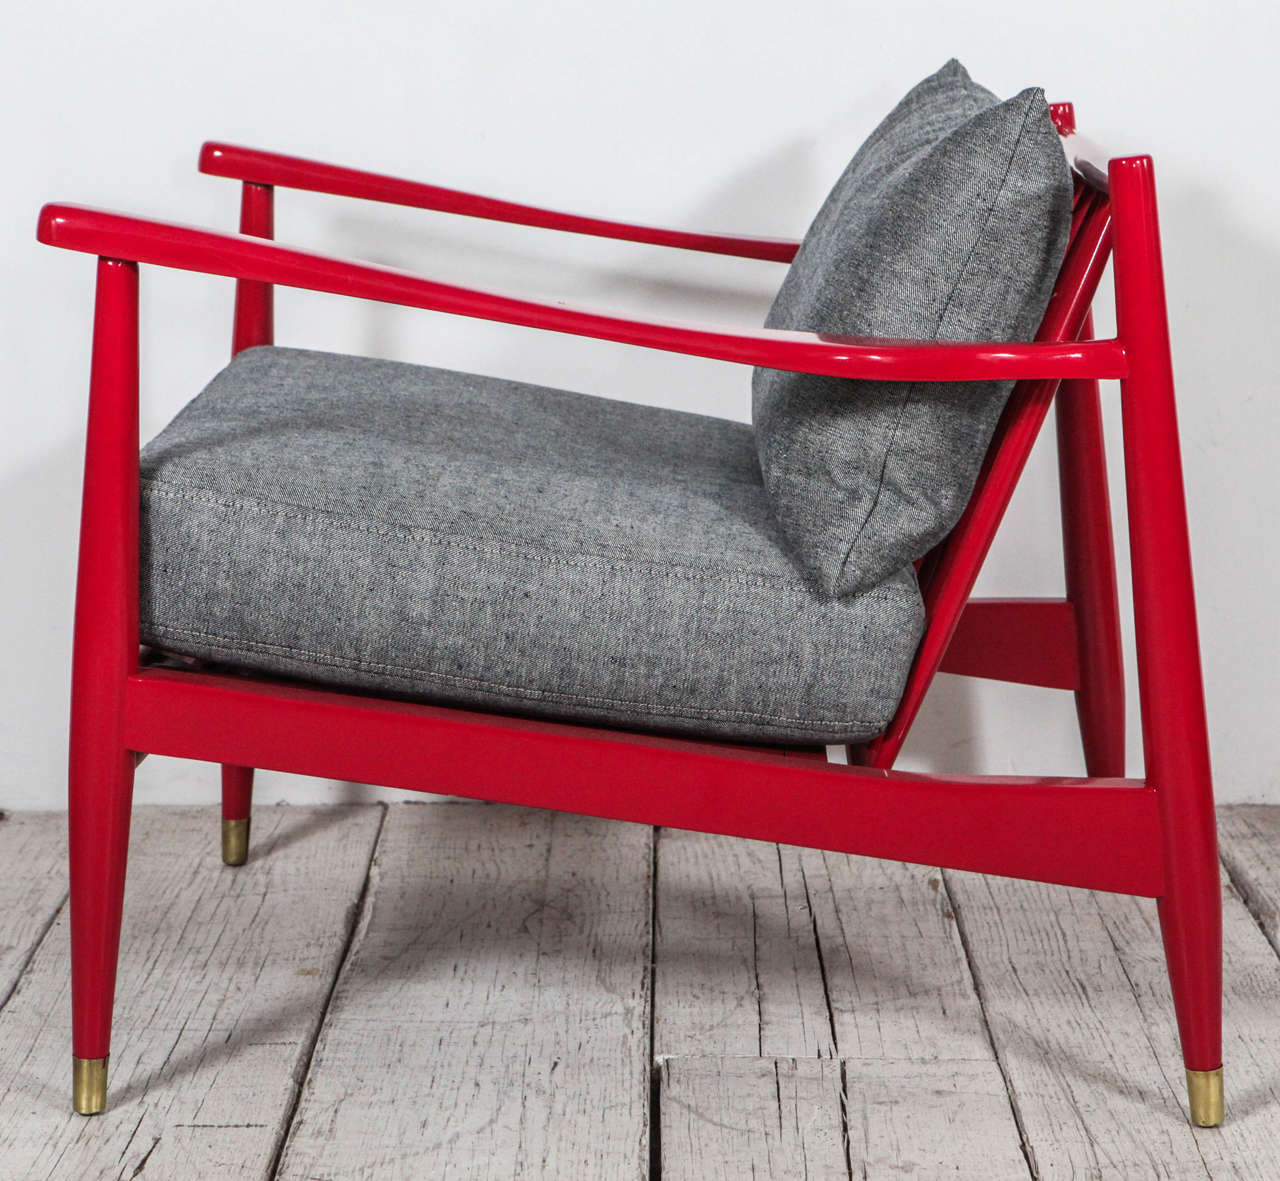 Mid-20th Century Vintage Spindle Back Viewing Chair in Lacquered Red and Reverse Denim